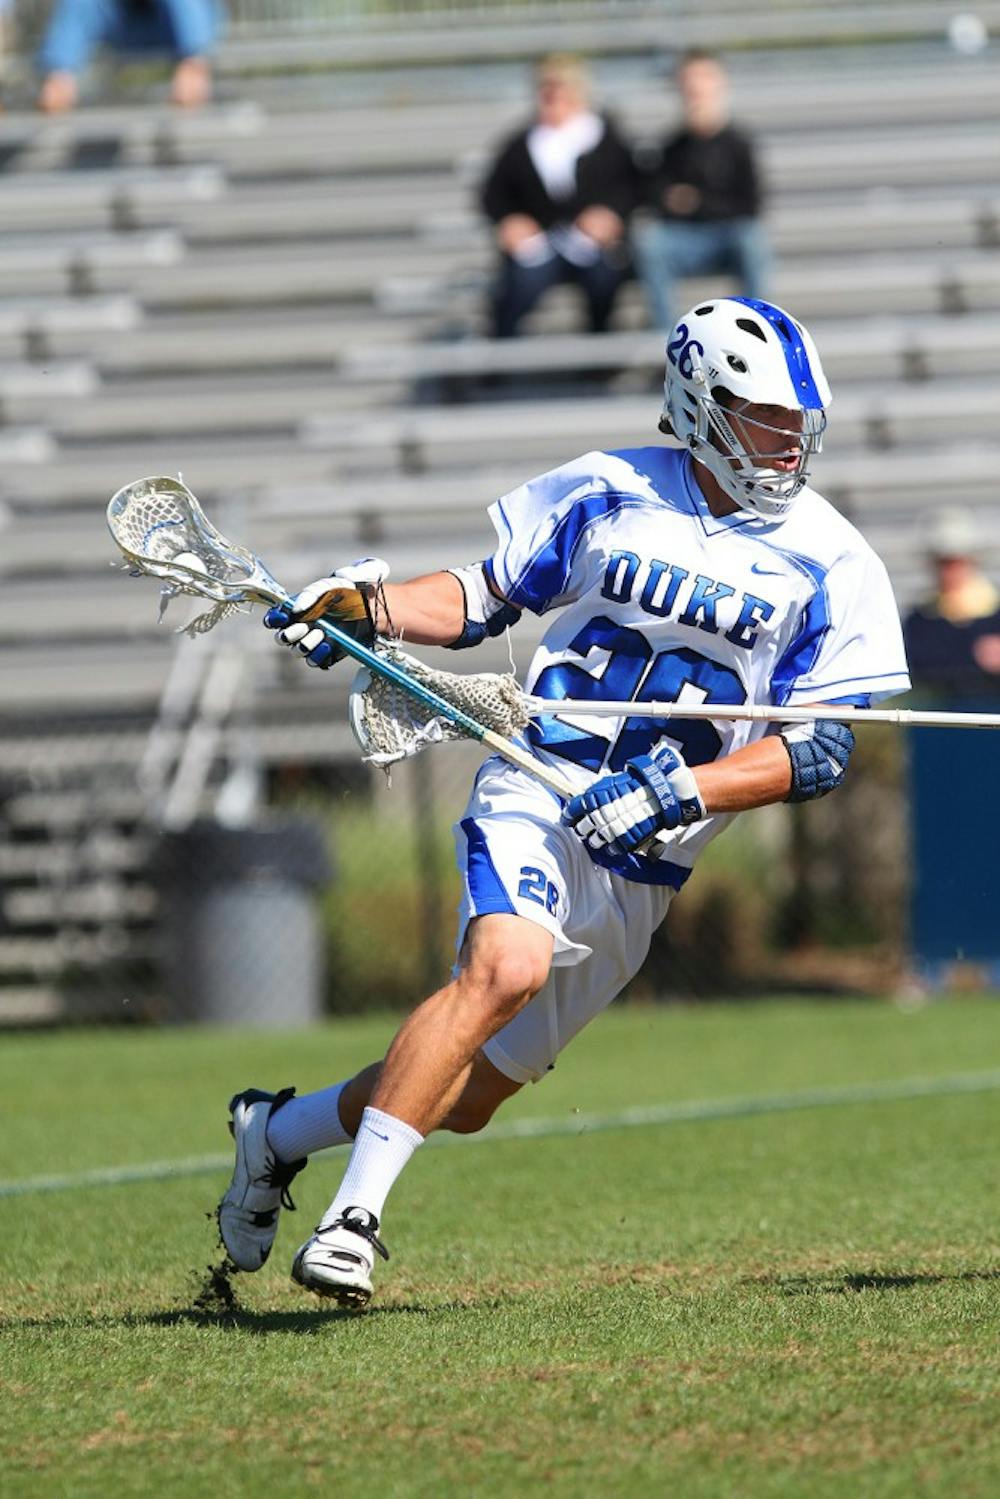 Robert Rotanz helped the Blue Devils past Syracuse with four goals.